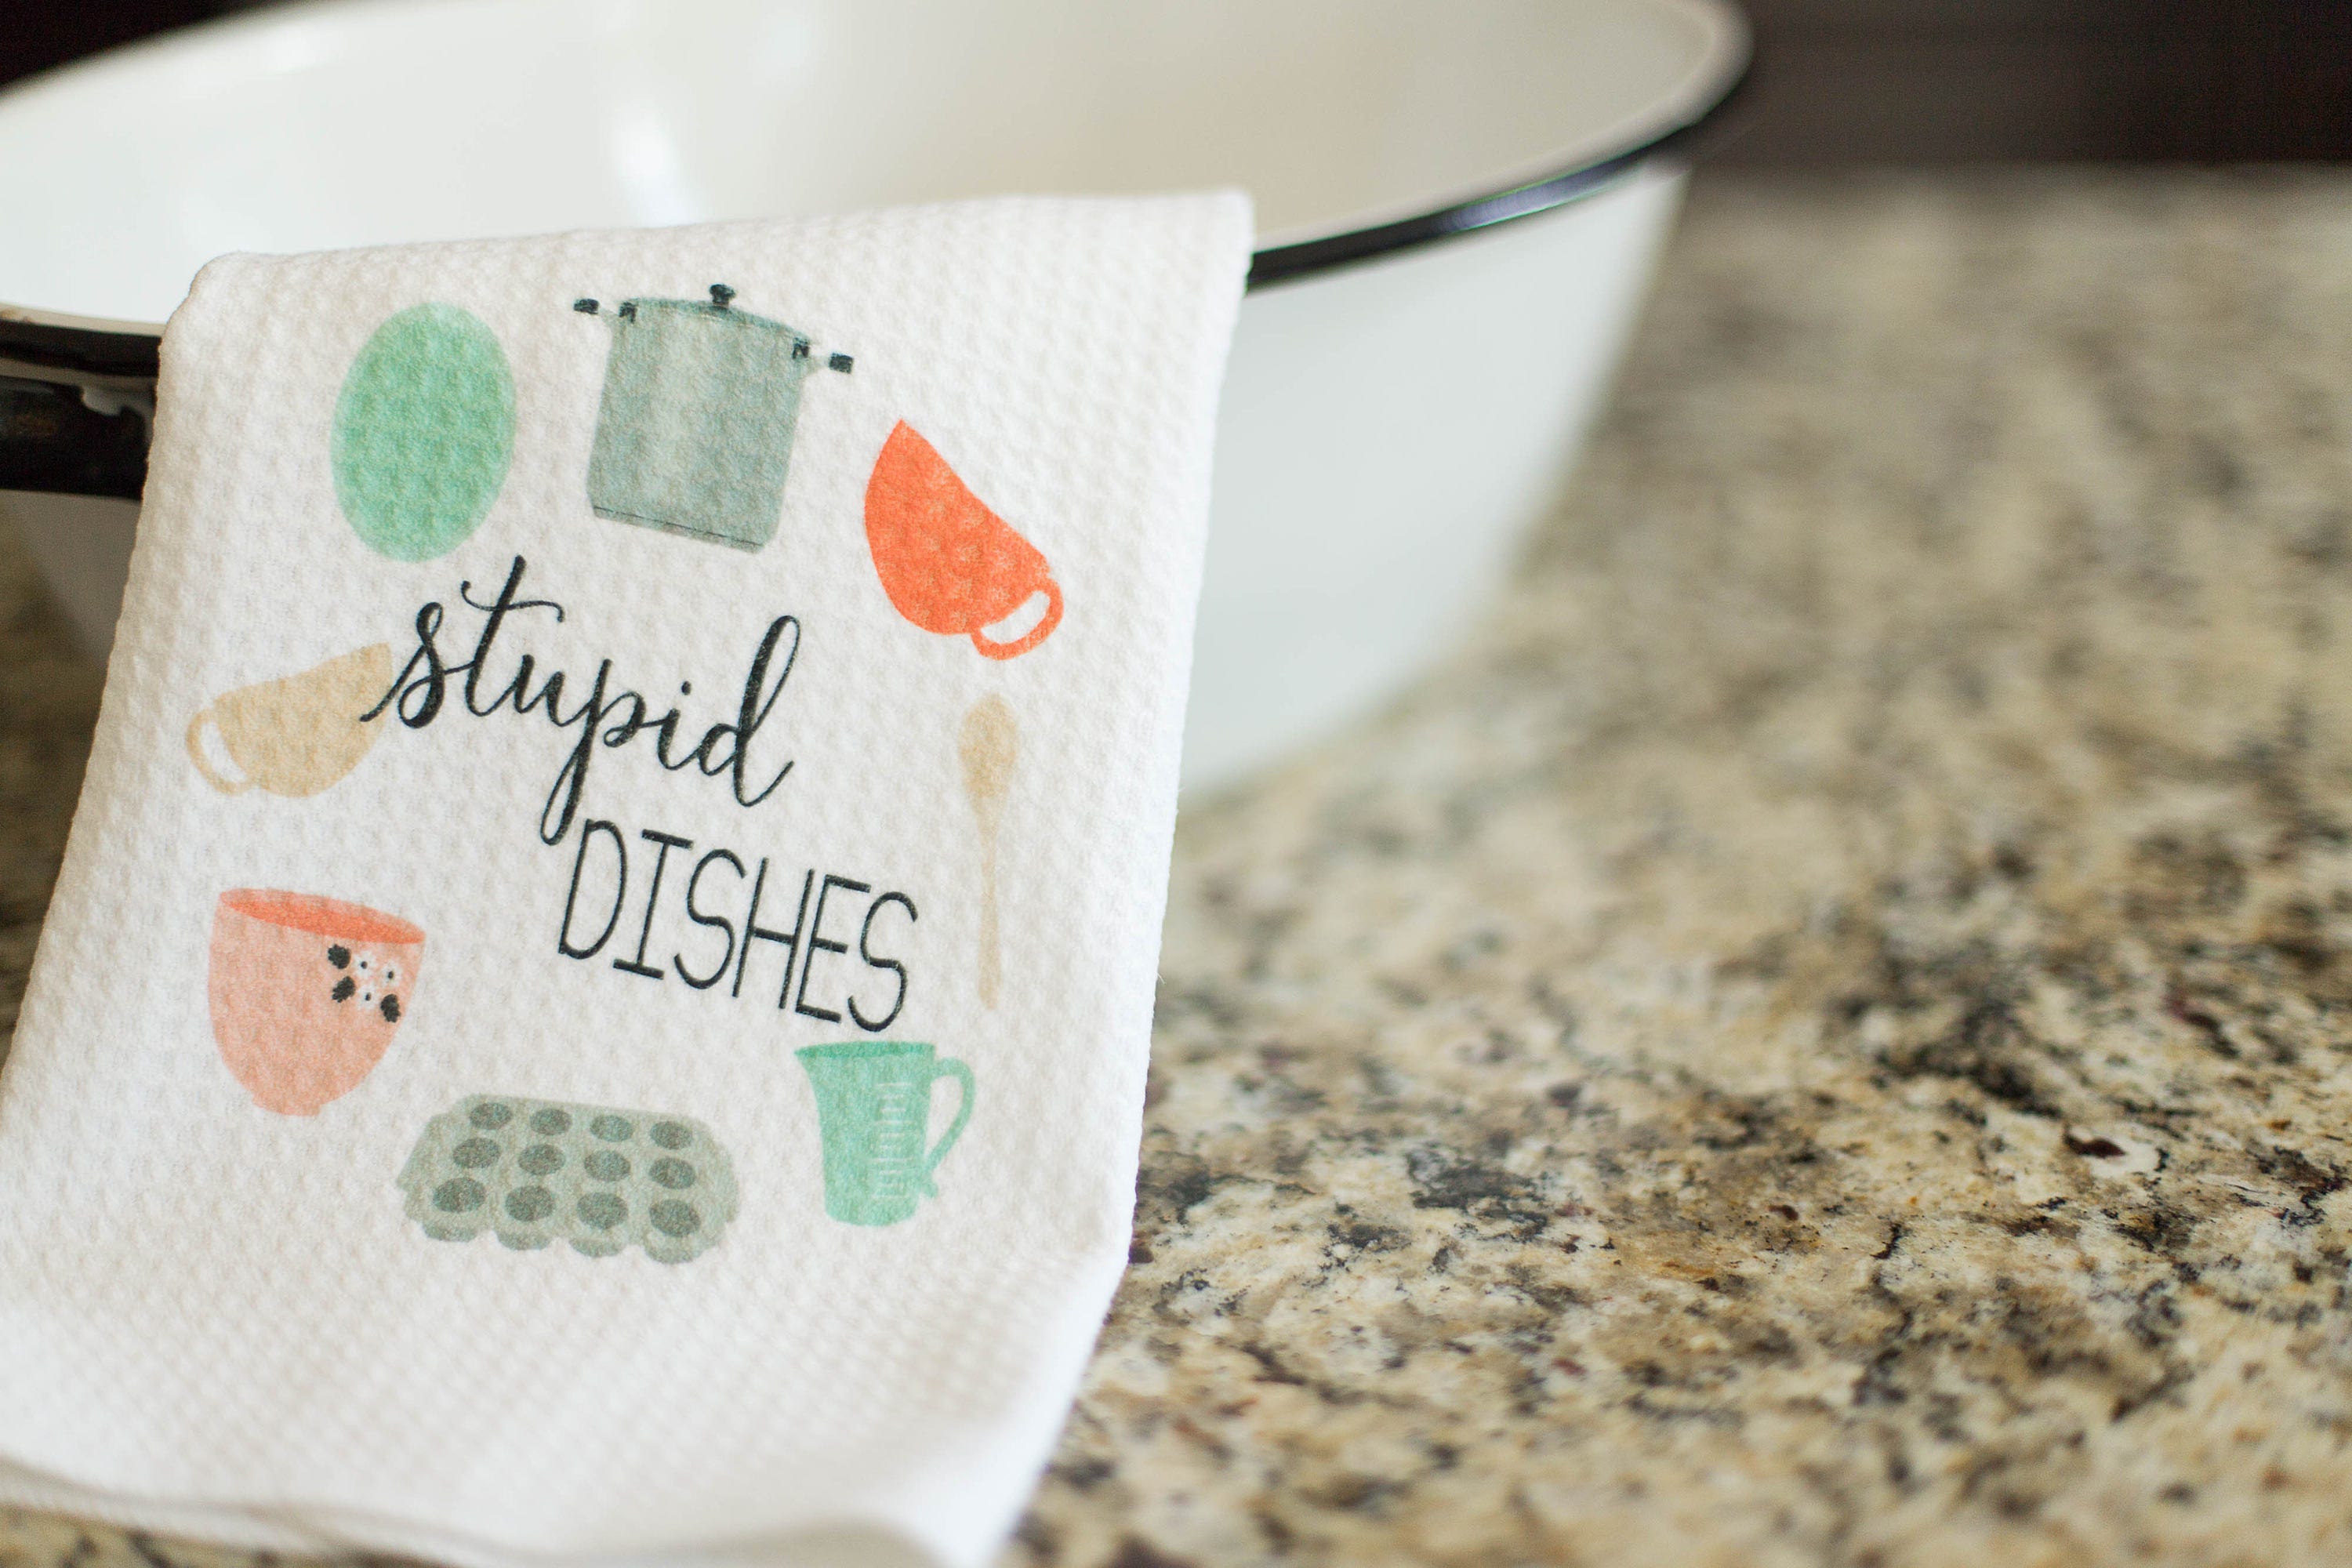 Nialnant Decorative Kitchen Towels,Cute Dish Towels for Drying Dishes,Funny  Gift Perfect for Housewarming Gift Mothers Day Birthday Wedding Kitchen